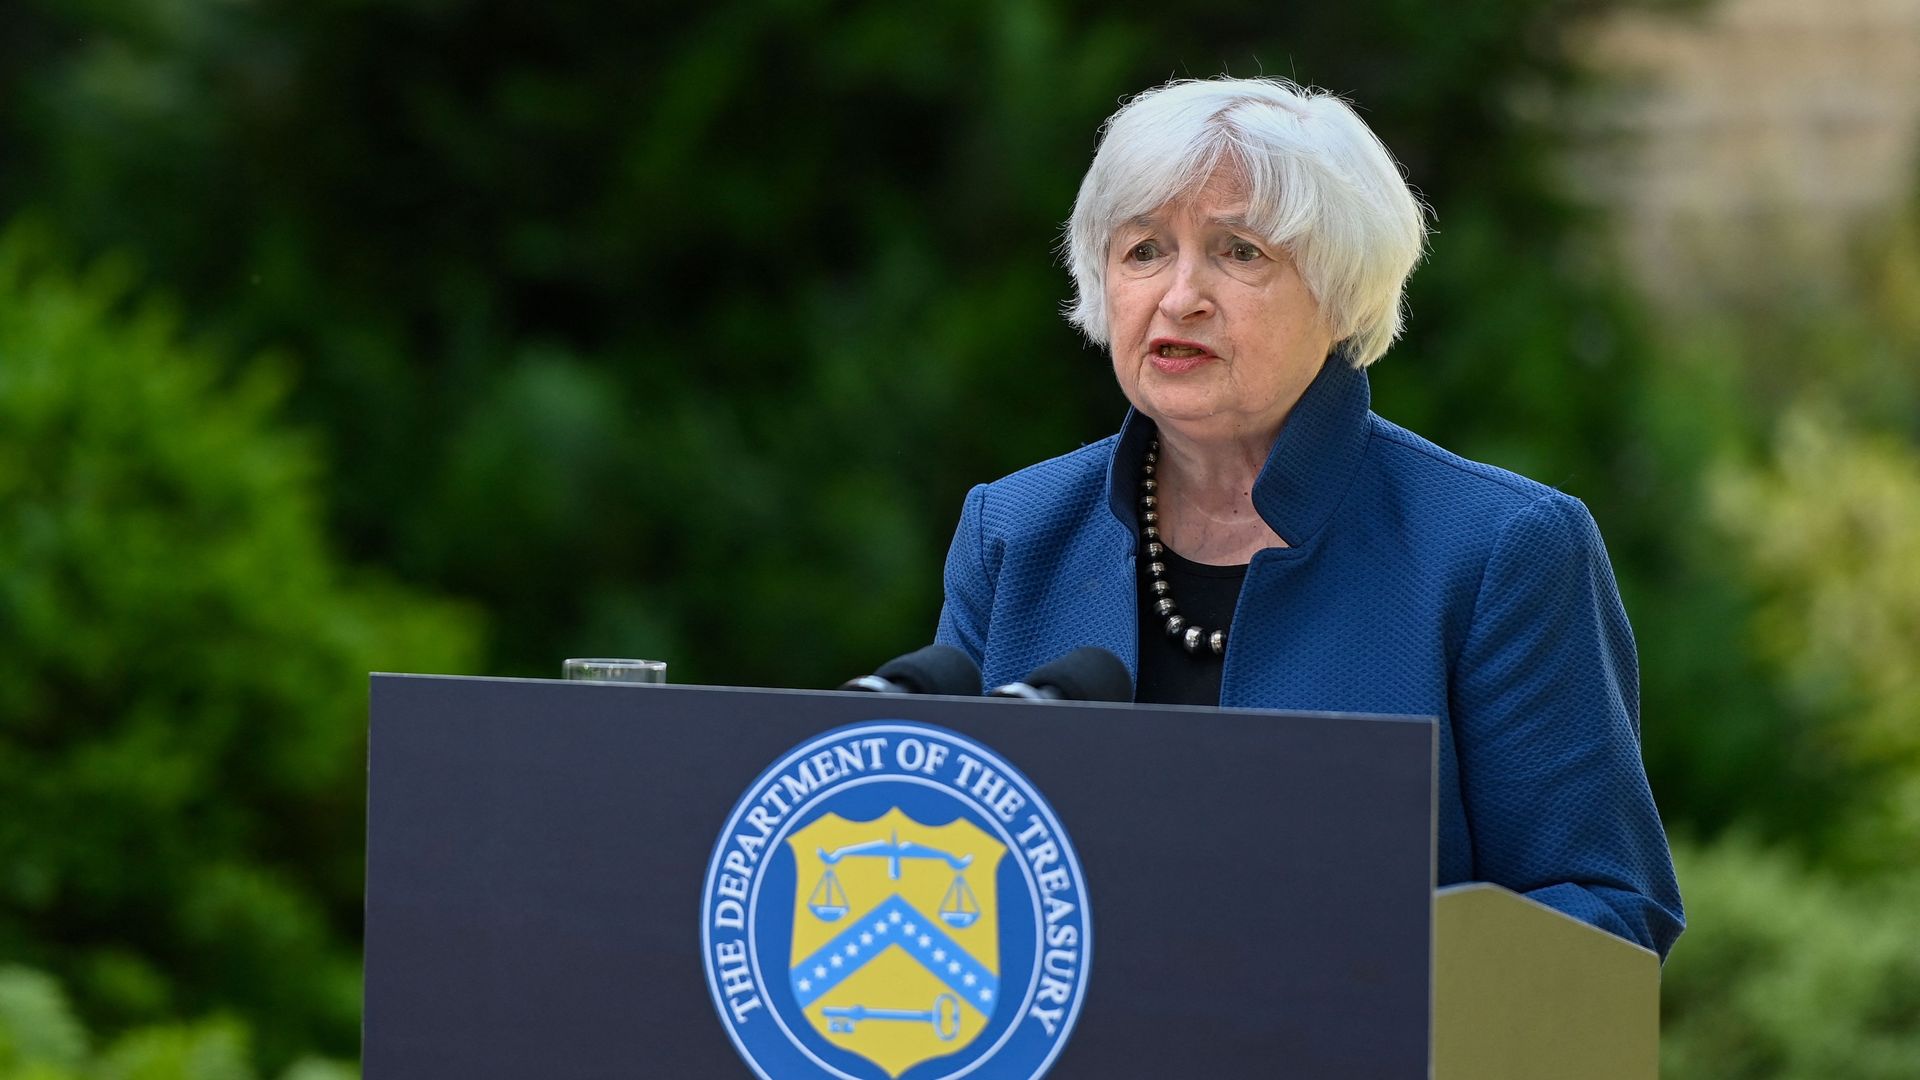 Janet Yellen at a lectern 